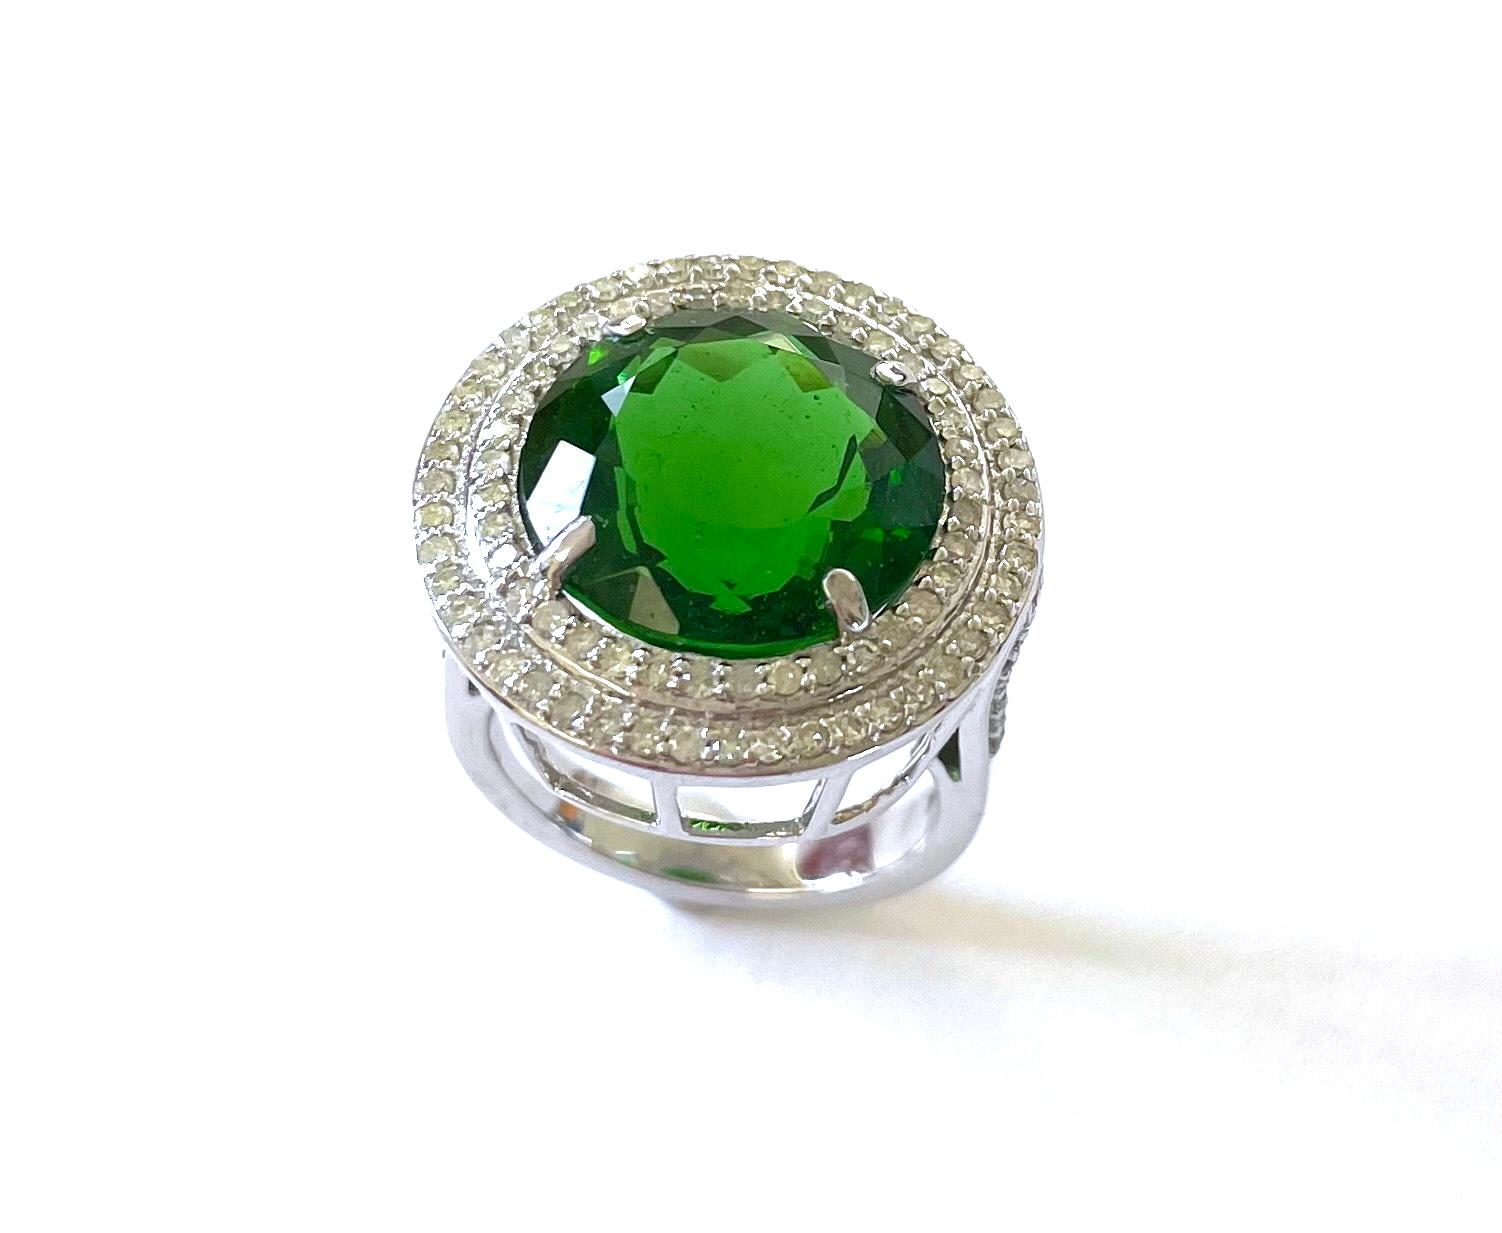 where is chrome diopside found